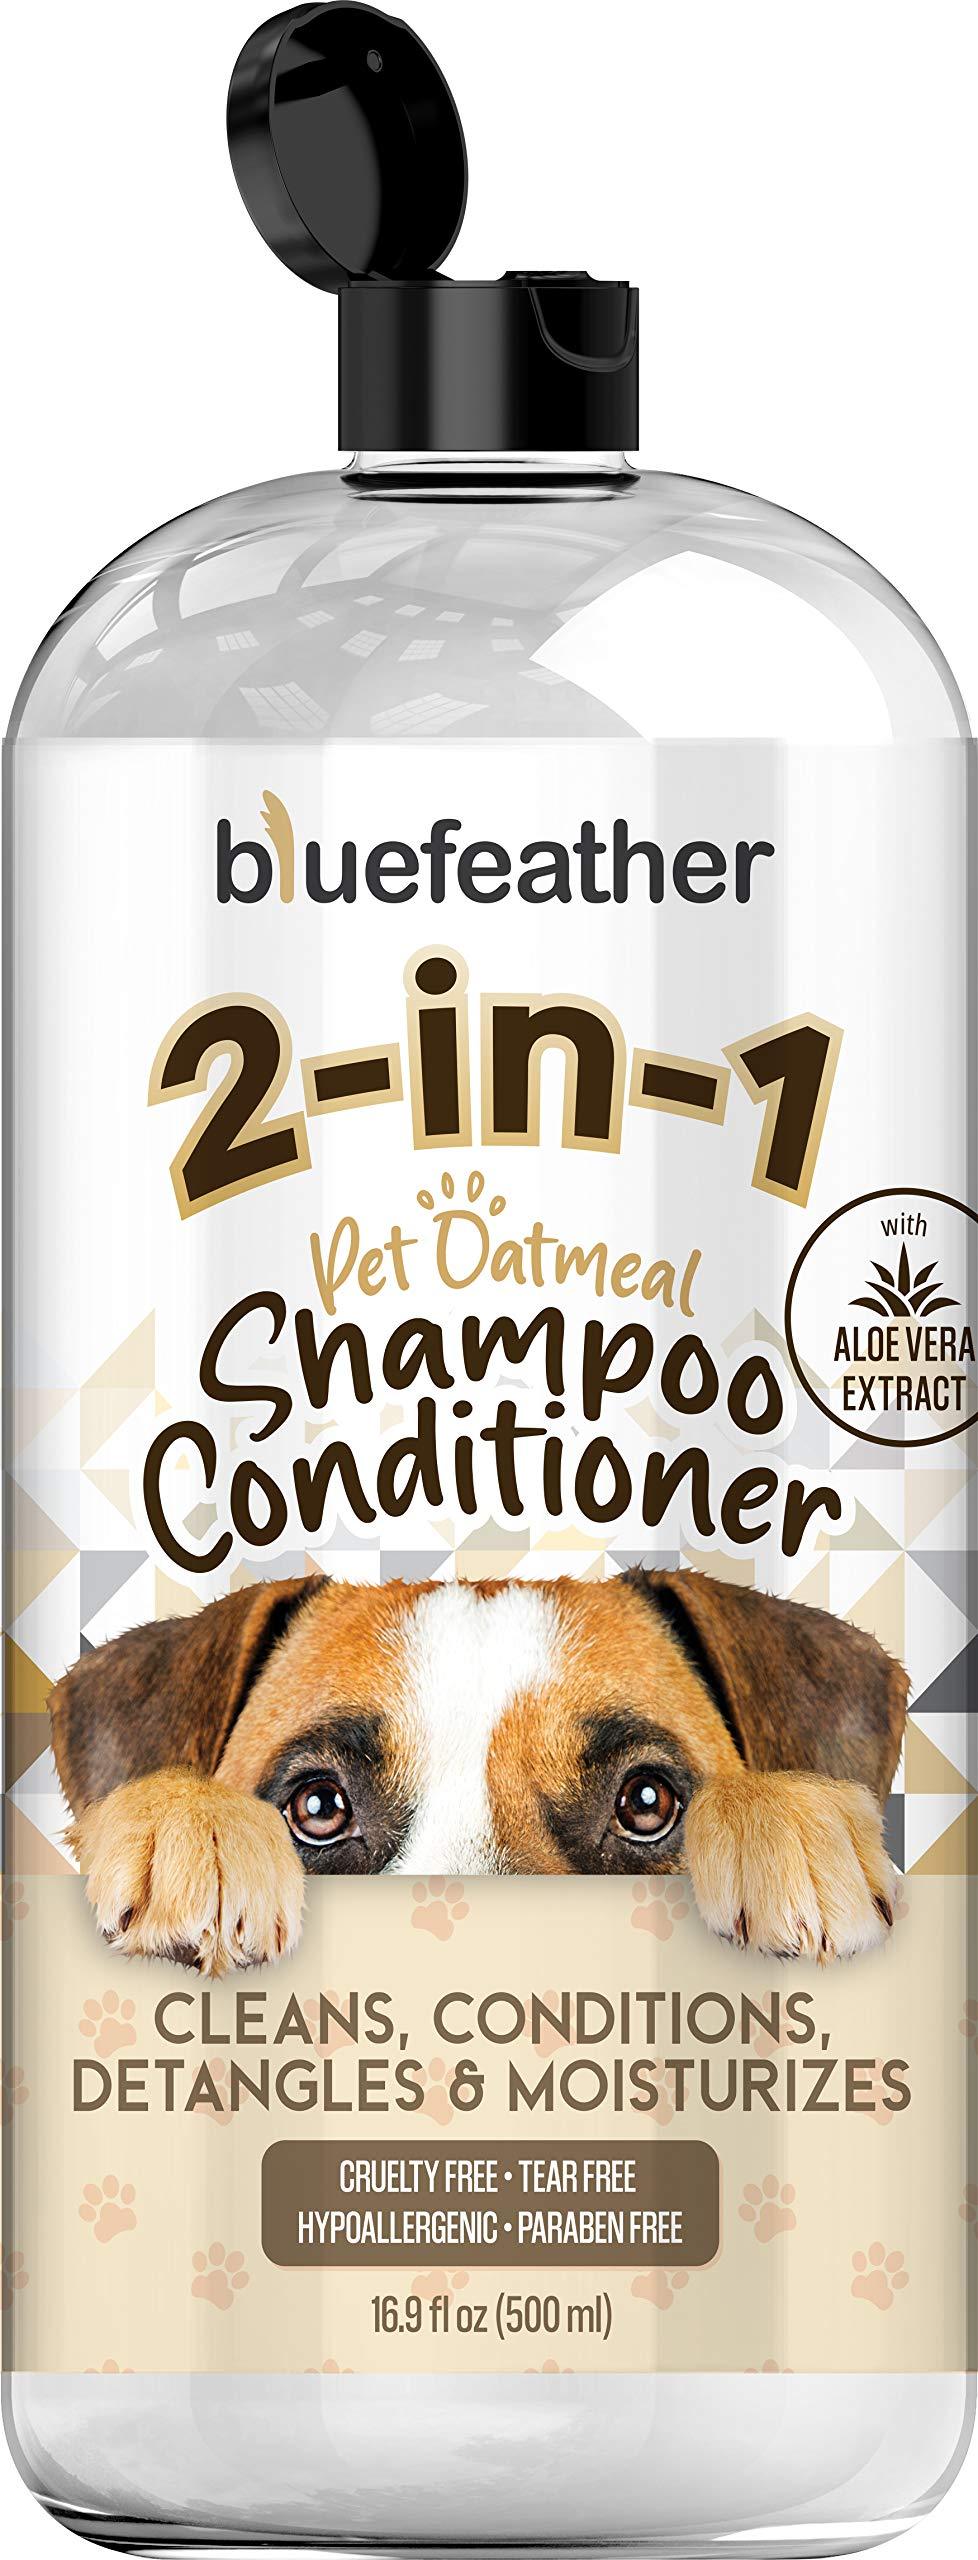 bluefeather Oatmeal Pet Shampoo and Conditioner 2 in1 with Aloe Vera – Dog Shampoo and Conditioner for Pets Dry, Itchy Skin – Bath Soap 2 in1 for Dogs, Puppies, Cats and Kittens - 16.9 Fl Oz - PawsPlanet Australia